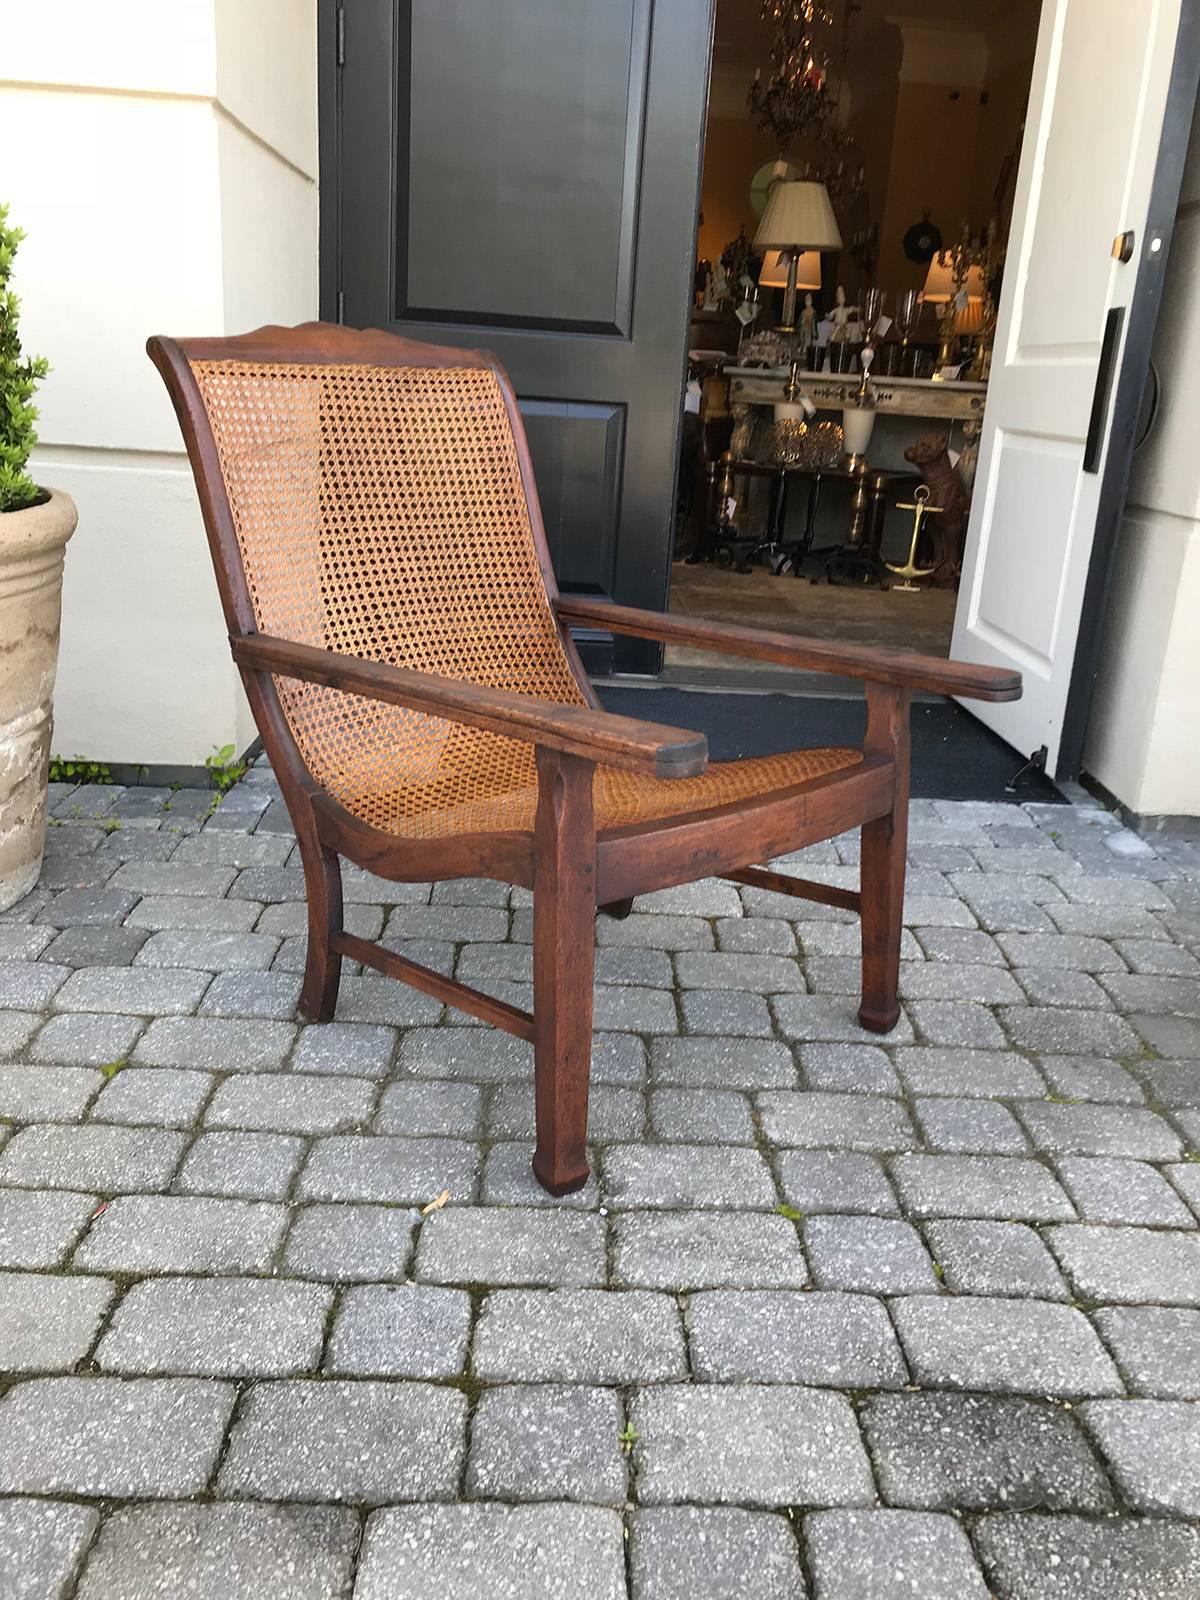 Early 19th Century West Indies Planters Chair 8